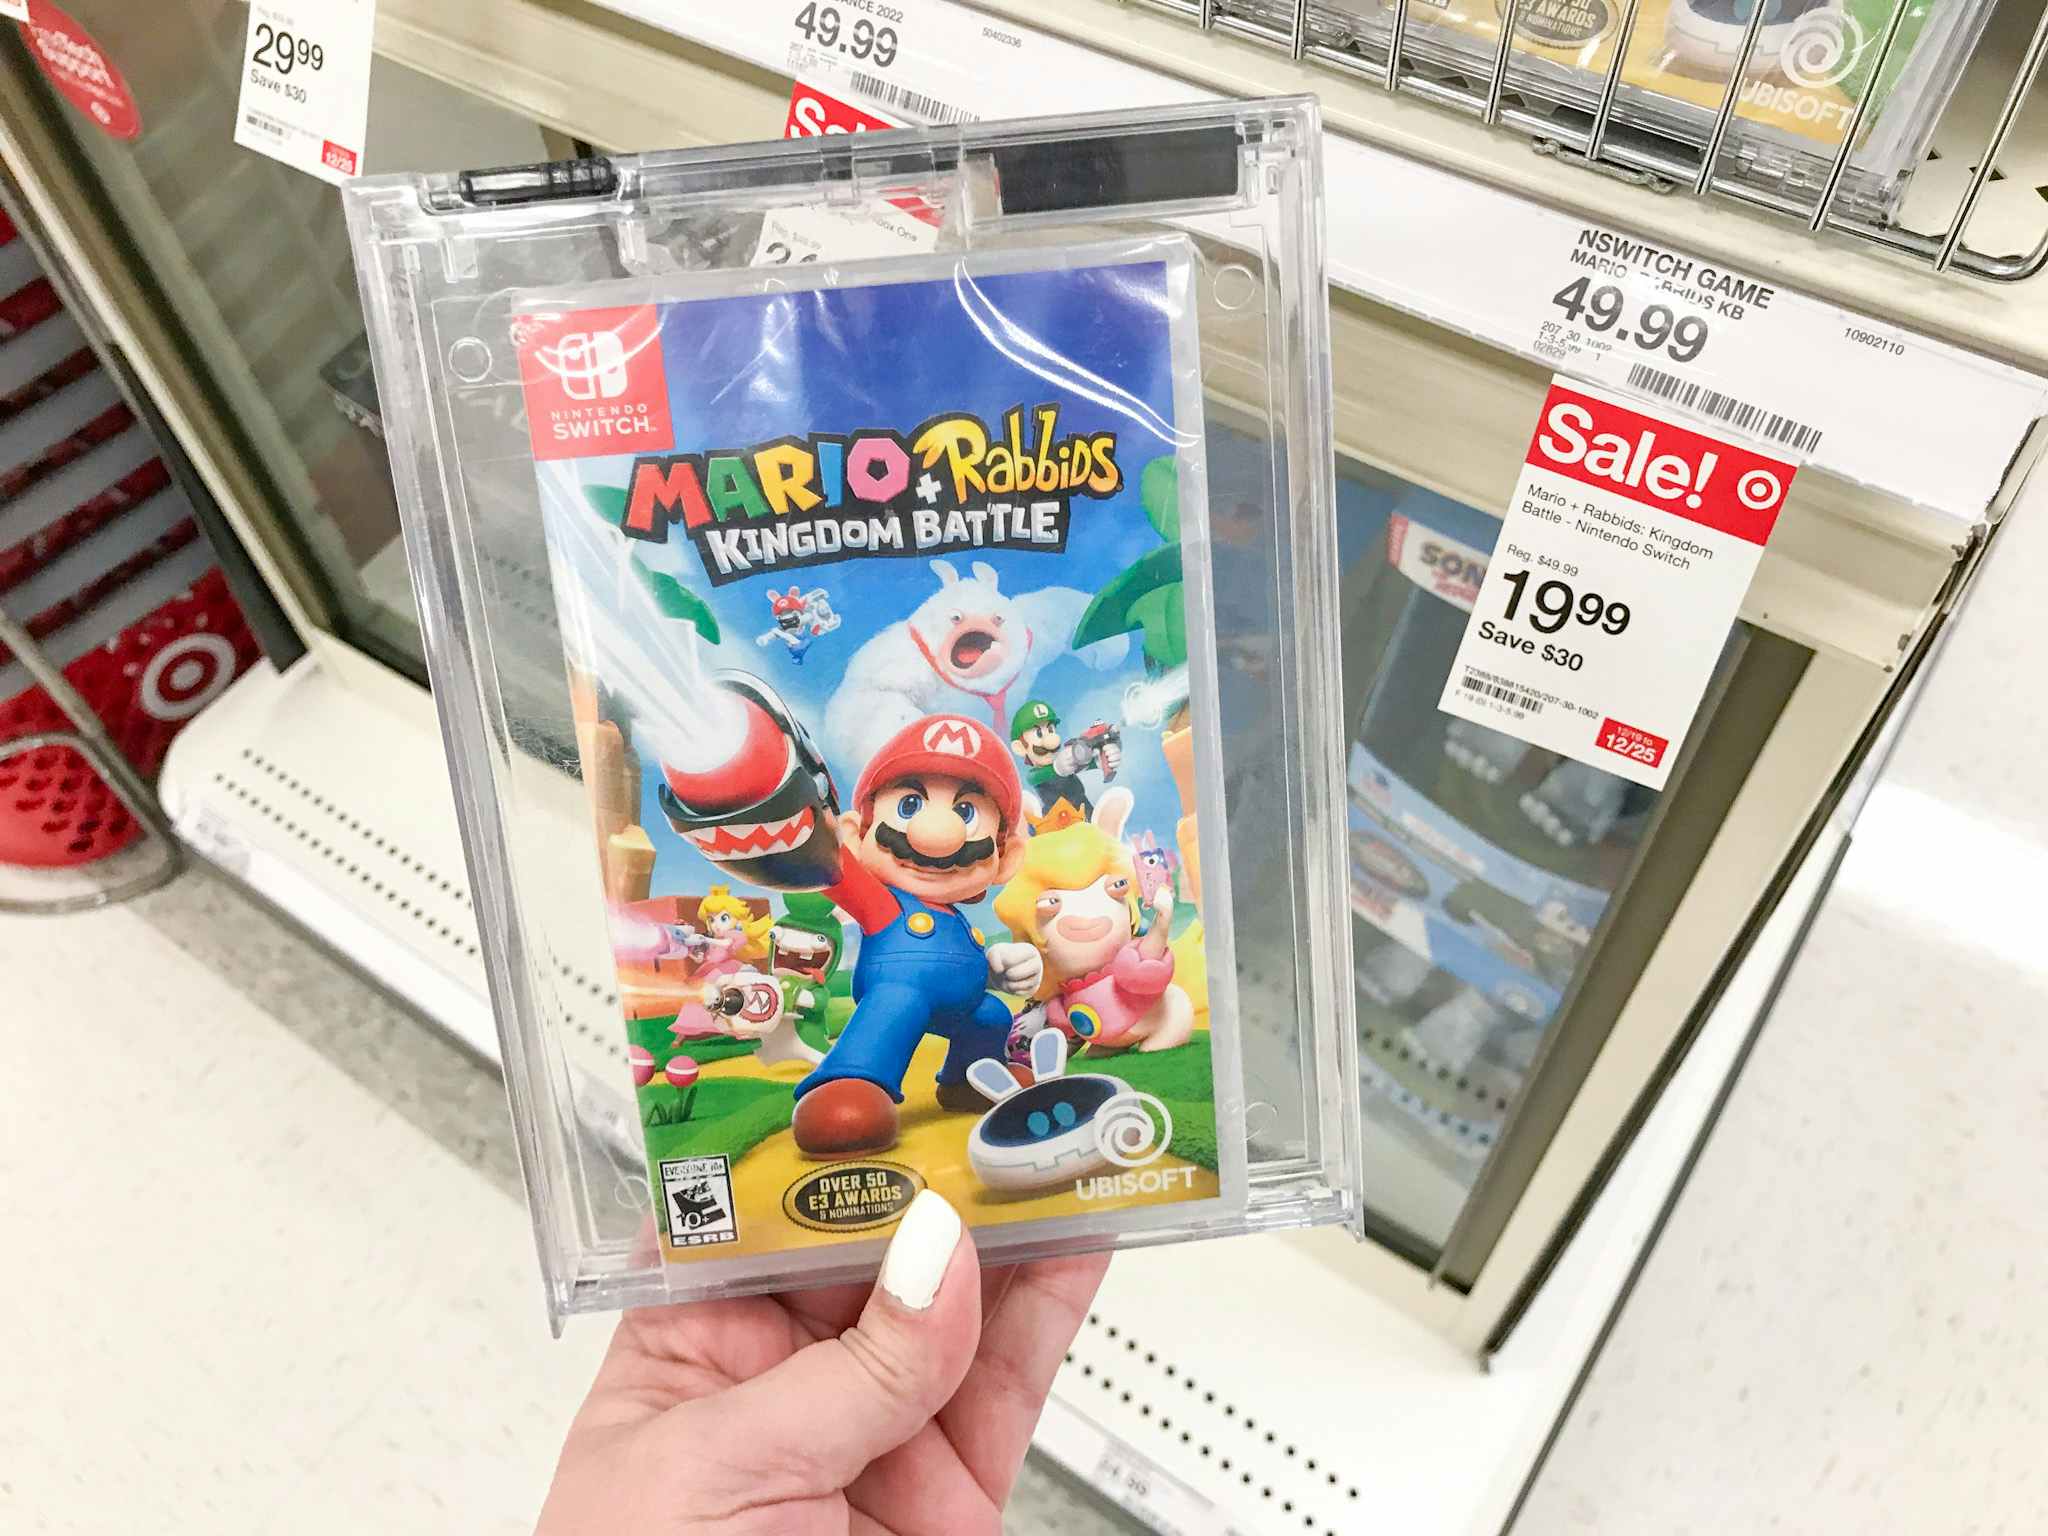 A person's hand holding a Mario game near a sale tag inside target.